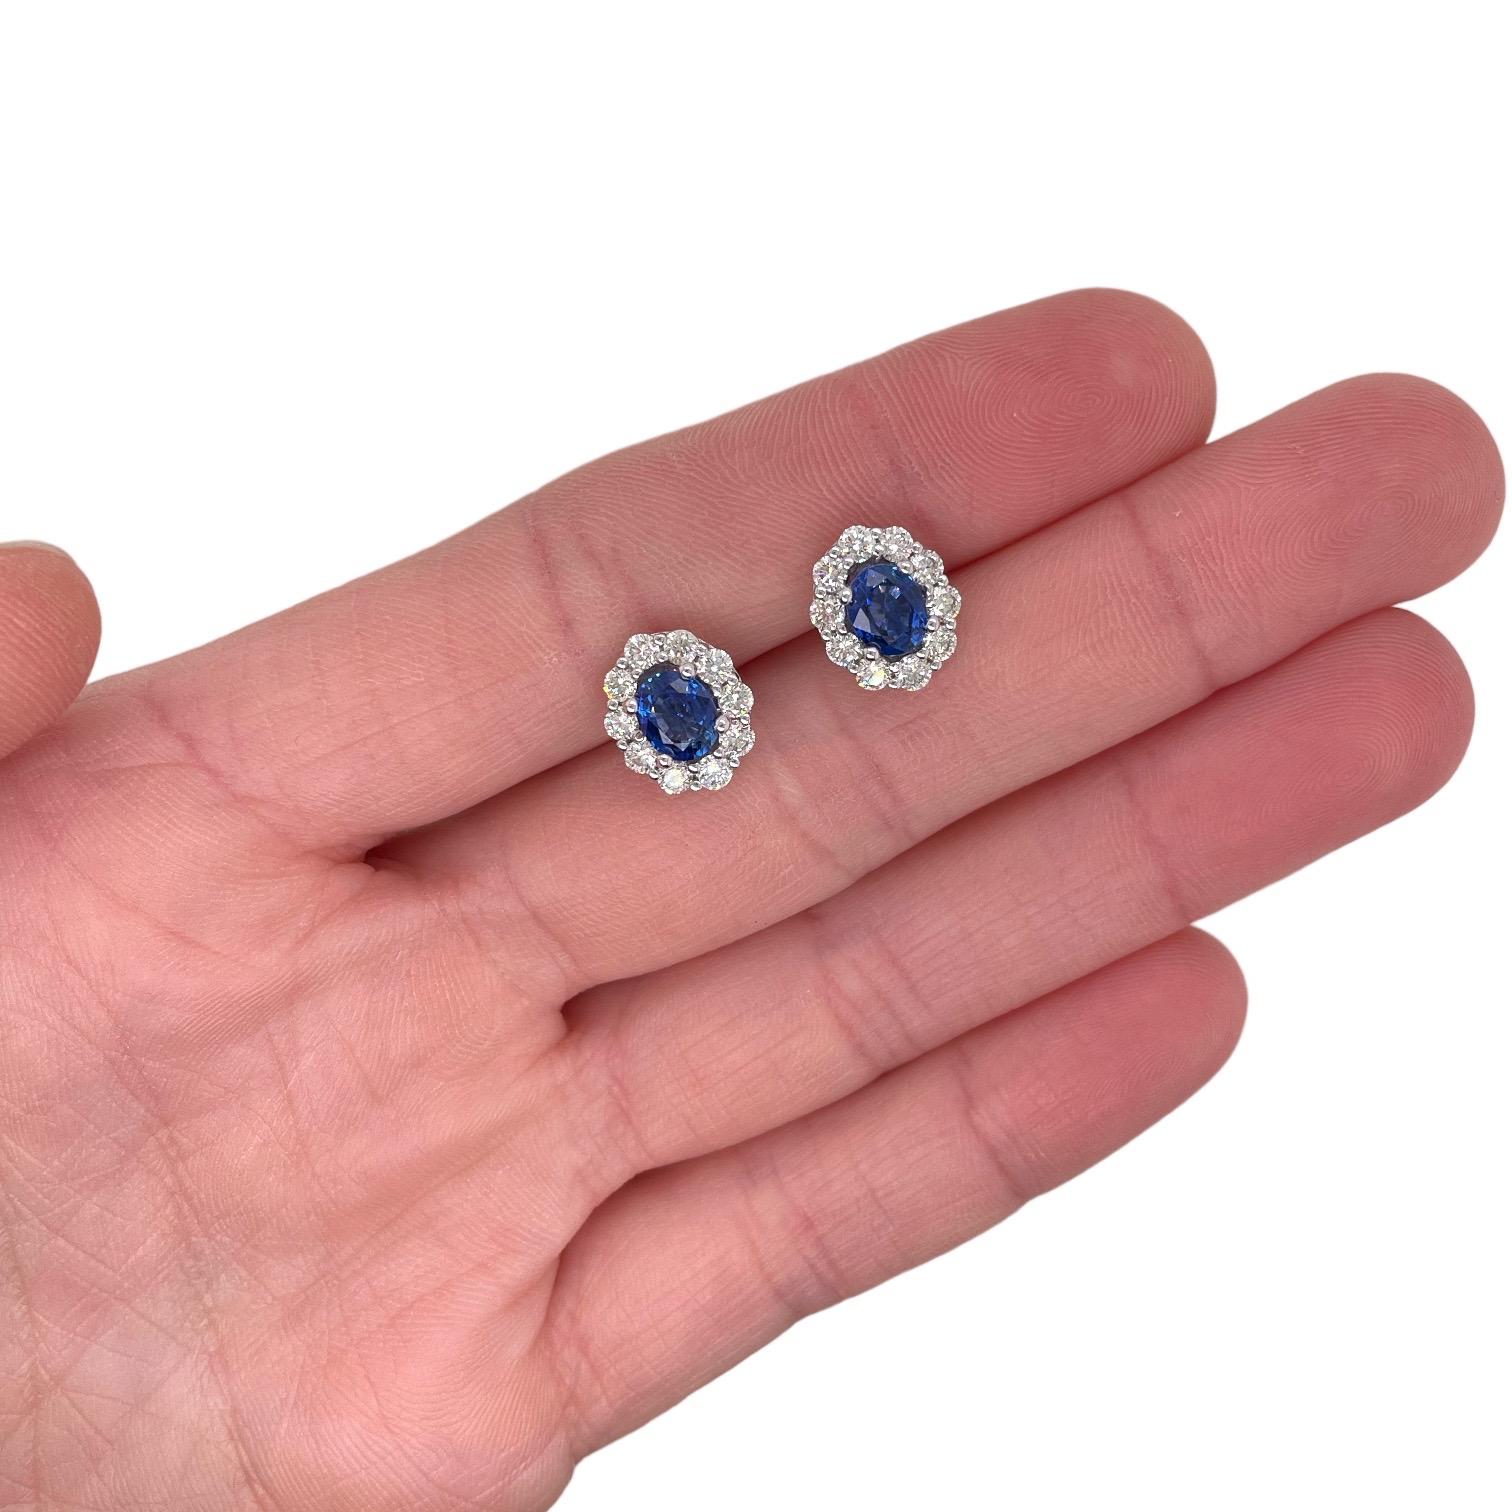 Petite stud earrings contain 2 finely matched oval brilliant cut blue sapphires, 1.80tcw. Surrounding sapphires are round brilliant diamonds creating a halo, totaling 1.05tcw. Diamonds are colorless and VS2 in clarity, excellent cut. Stones are